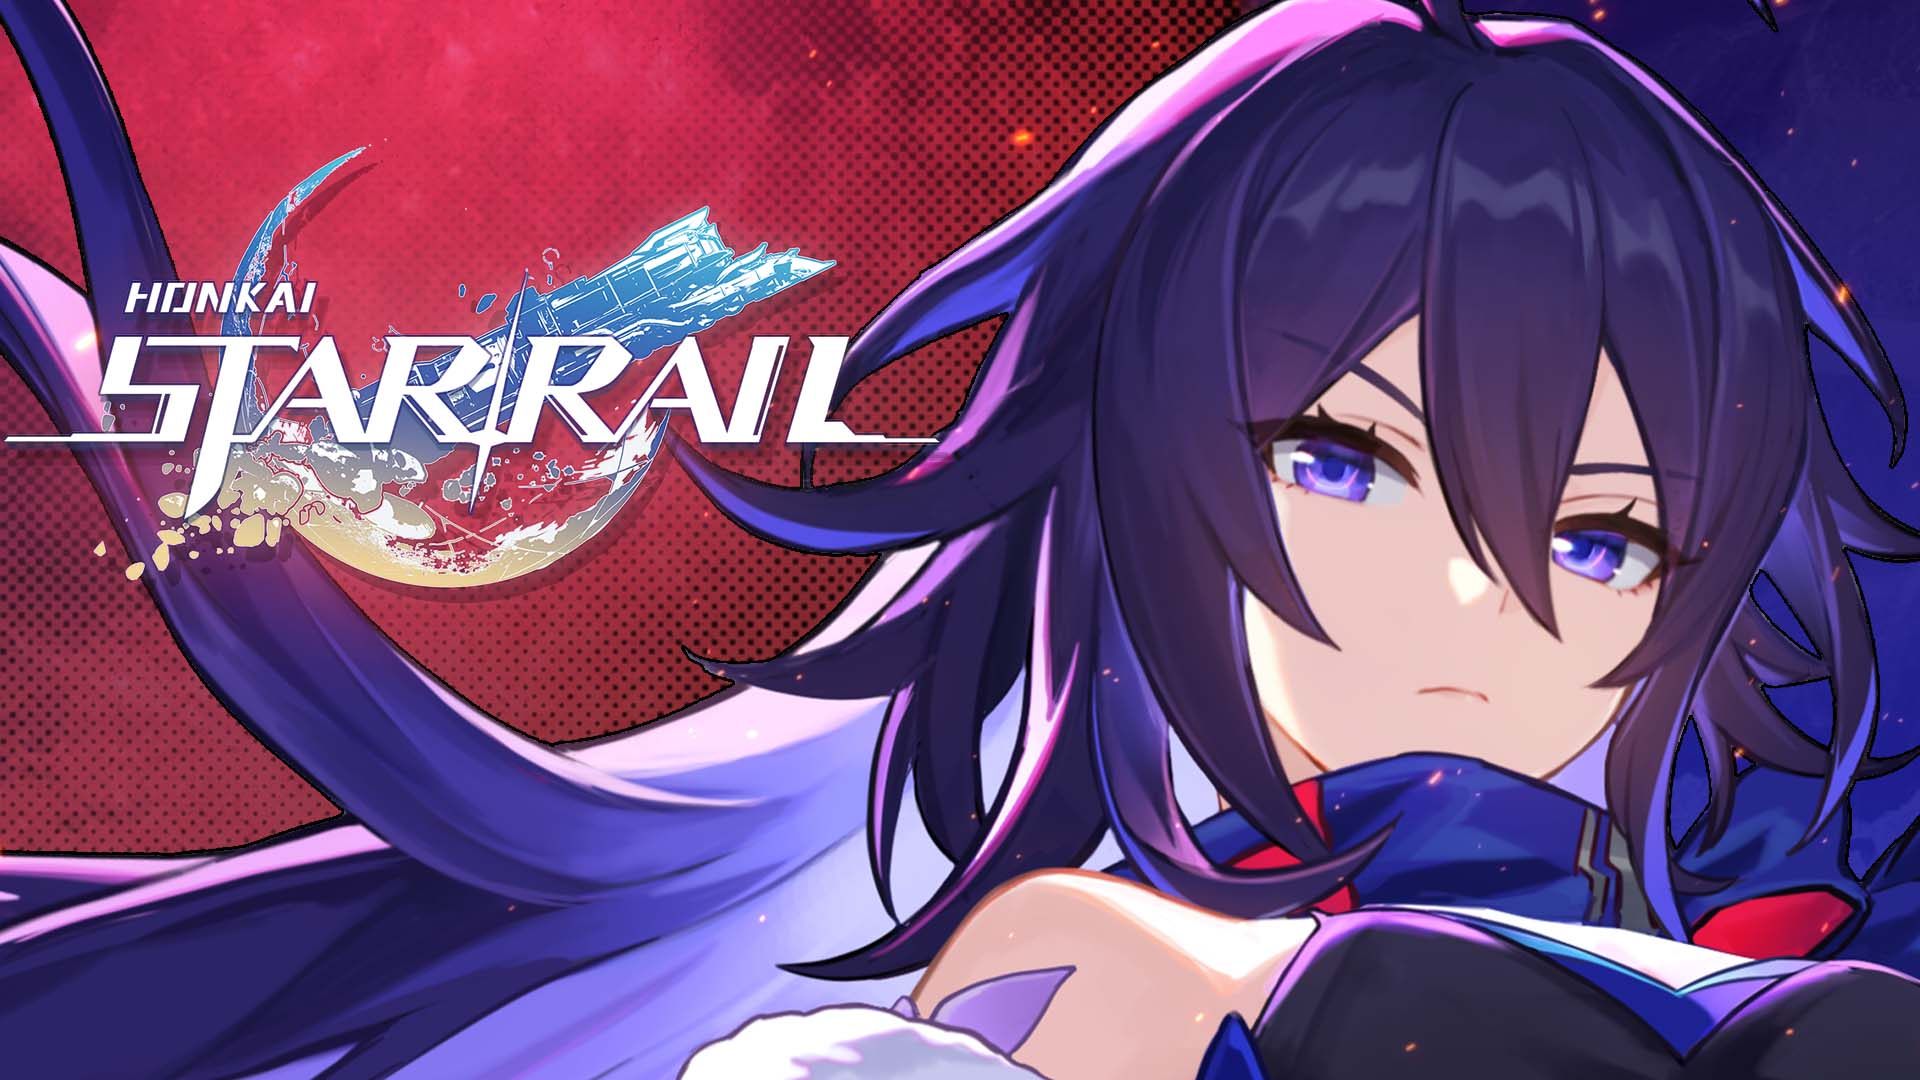 Released worldwide on April 26, Honkai: Star Rail has now surpassed Genshin Impact as the biggest global launch of any Chinese video game after amassing 20 million downloads within the first day of its release. Photo: Twitter